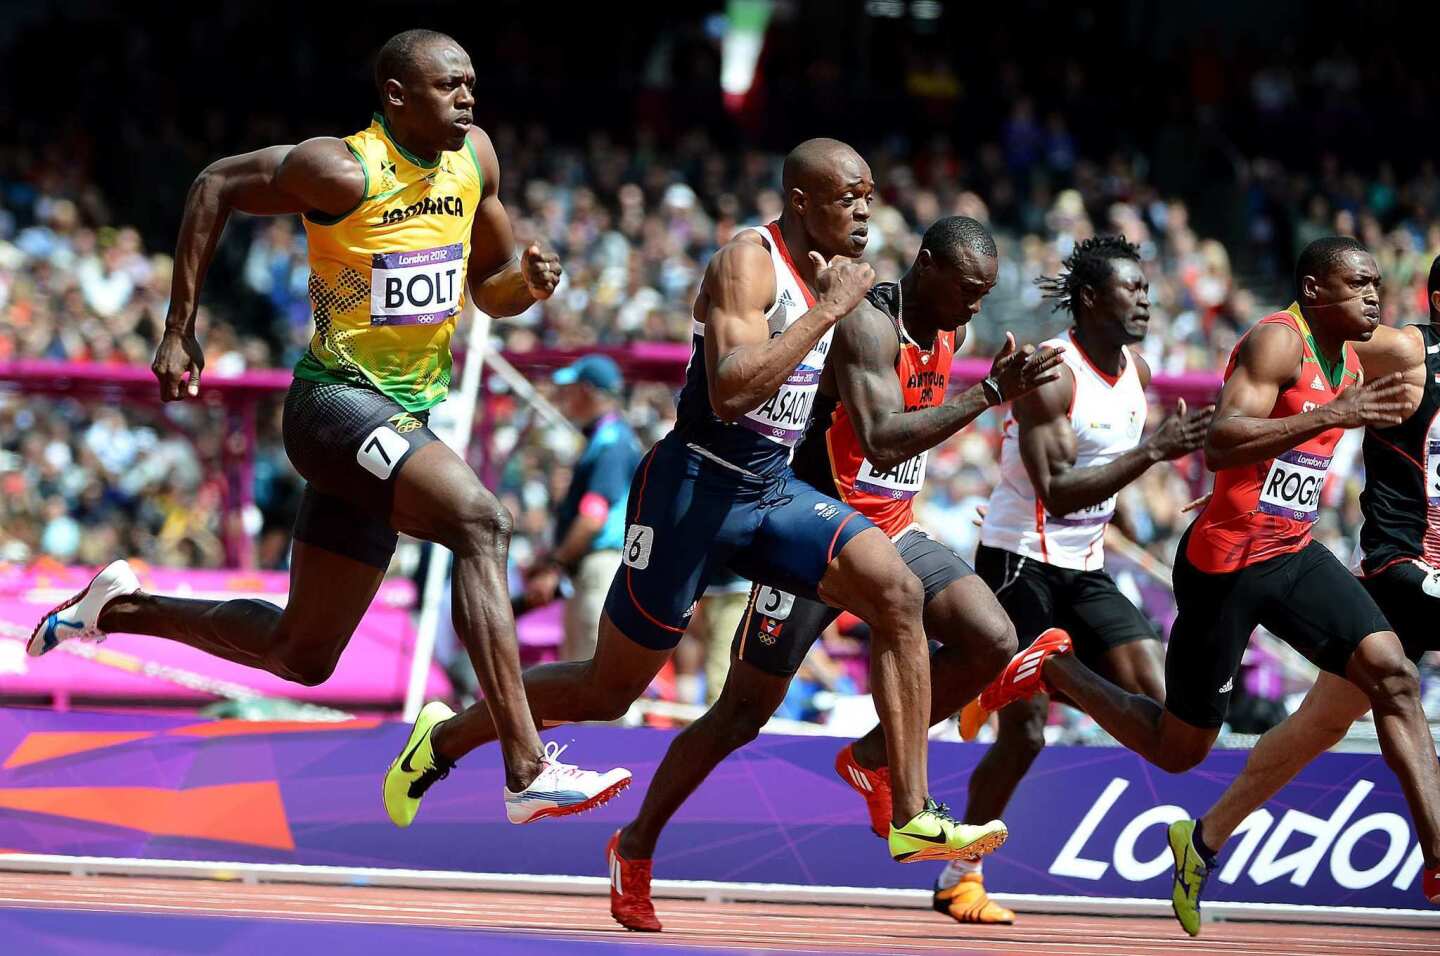 Jamaica's Usain Bolt, left, wins his qualifying heat of the 100- meter race.